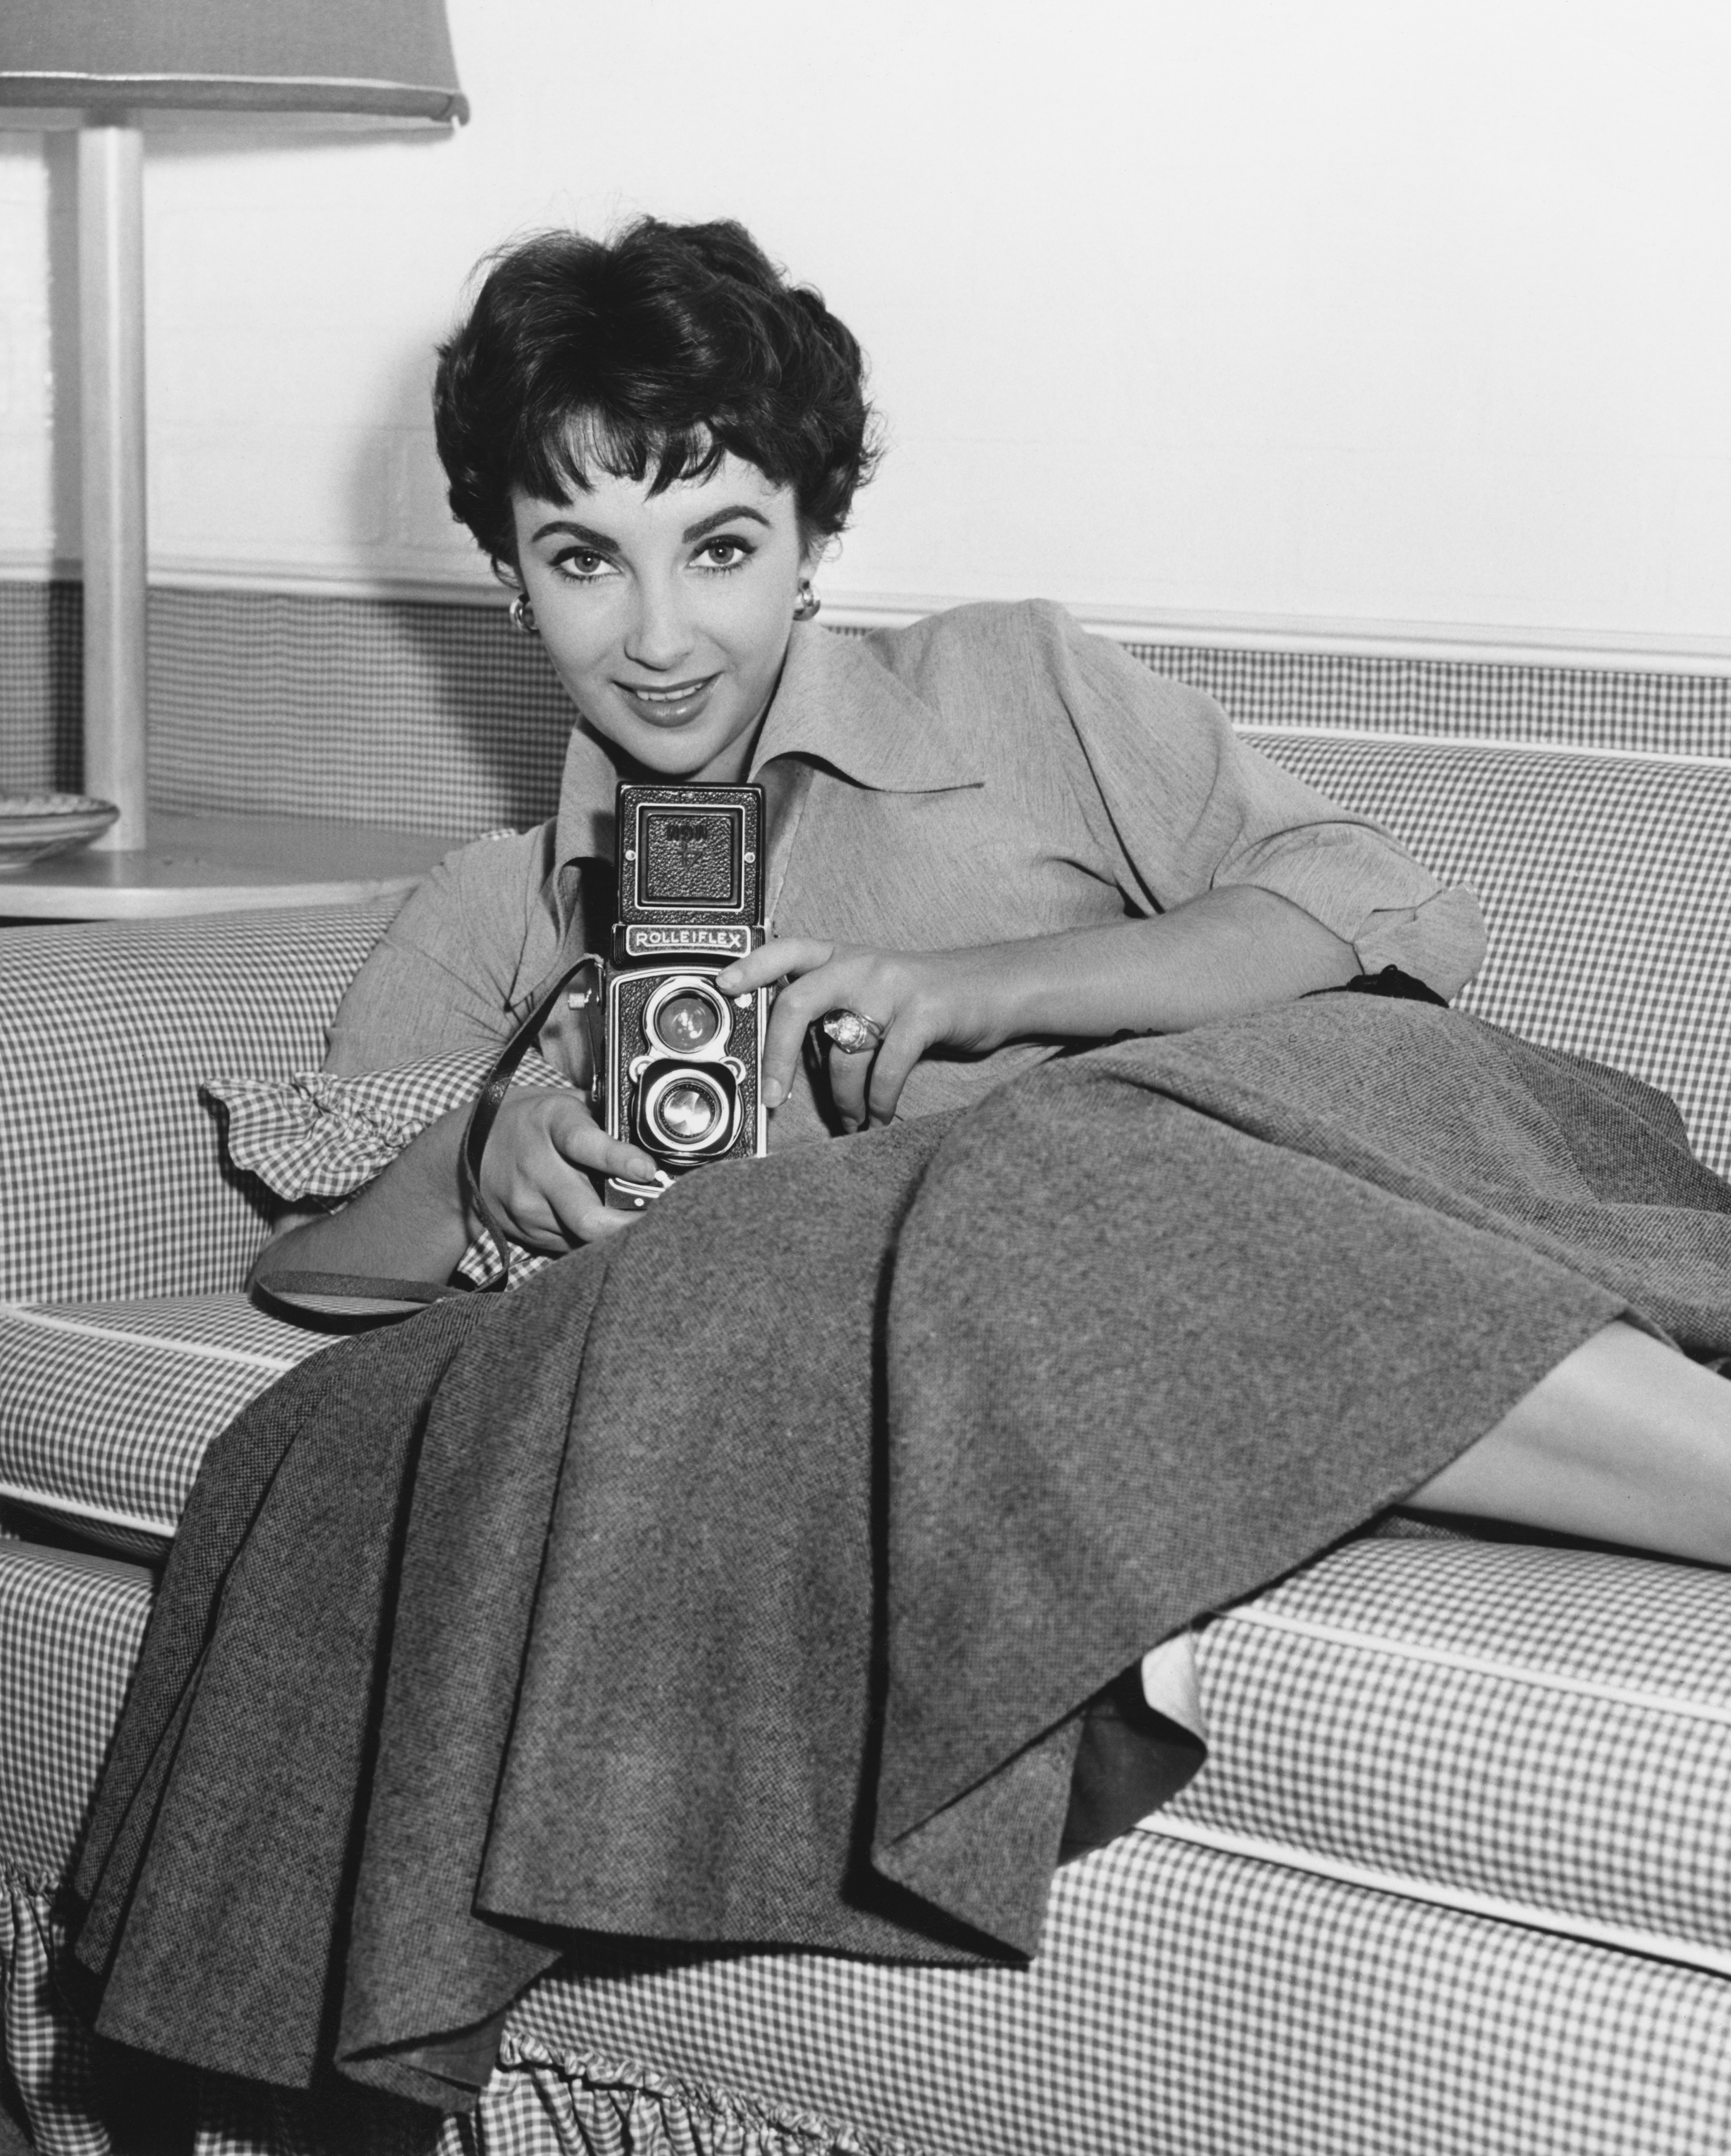 Smiling with a short haircut, wearing a flared dress, and holding a camera while sitting on a couch